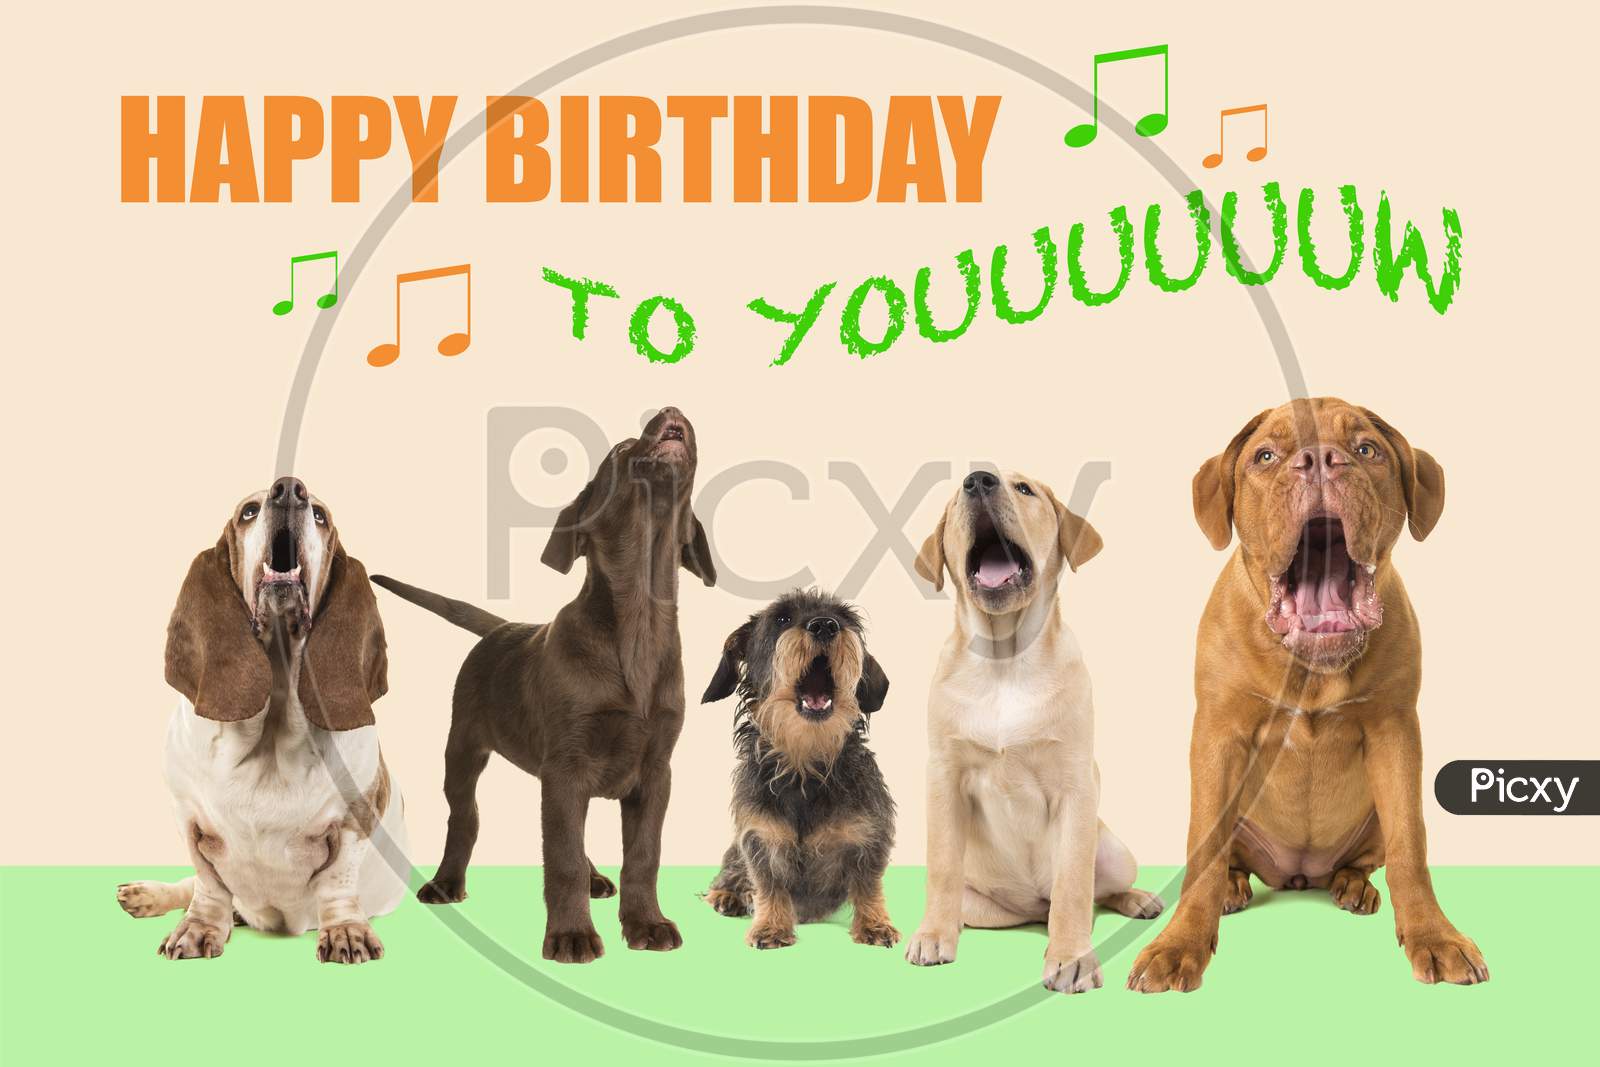 Group Of Dogs With Various Breeds Looking Up Singing On A Colored Background With The Text Happy Birthday To You